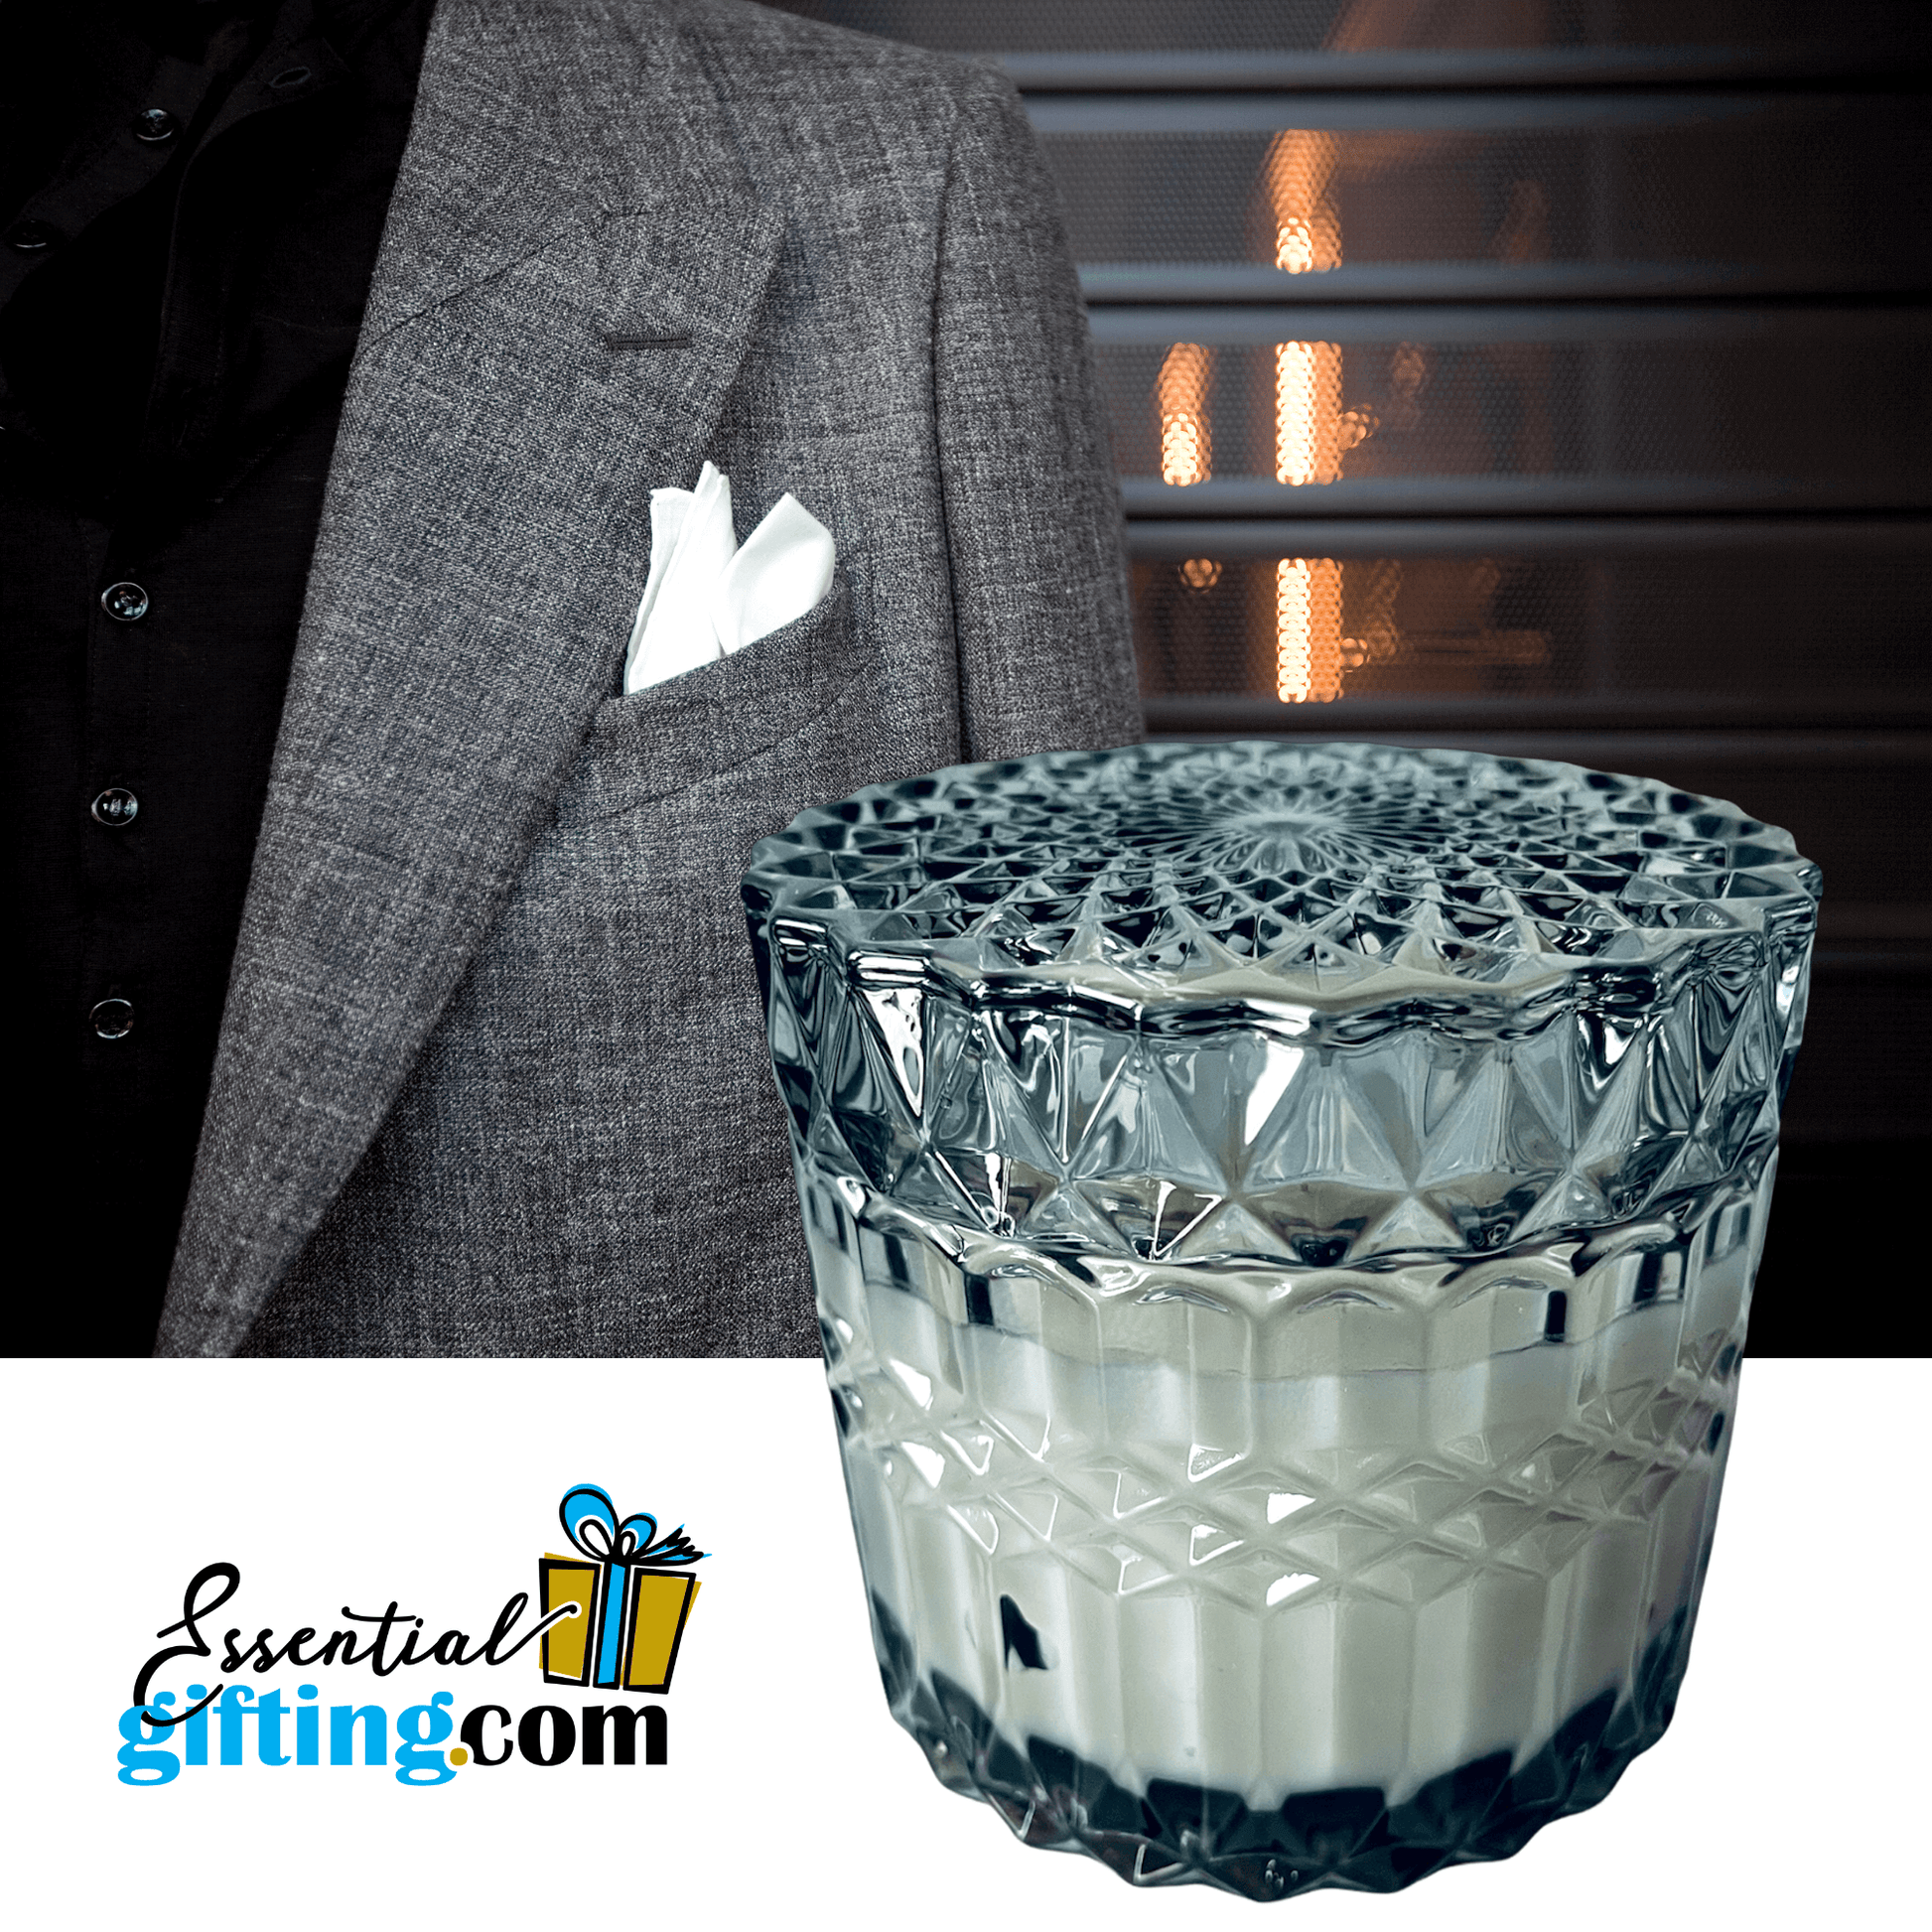 Elegant glass candle on a suit jacket with a logo for "Essentialgifting.com"